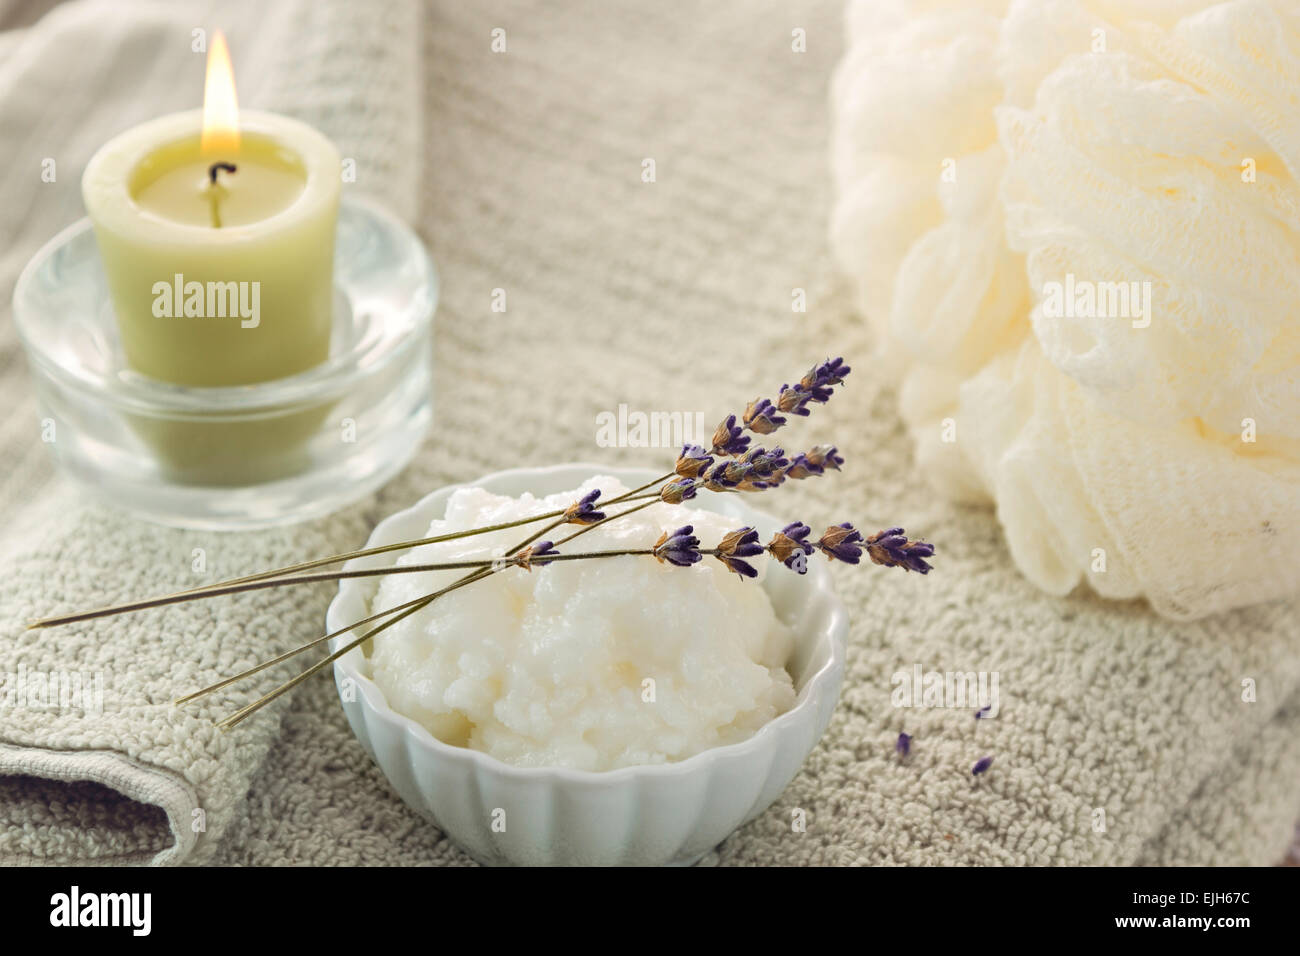 Coconut Oil used in spa and beauty treatments Stock Photo